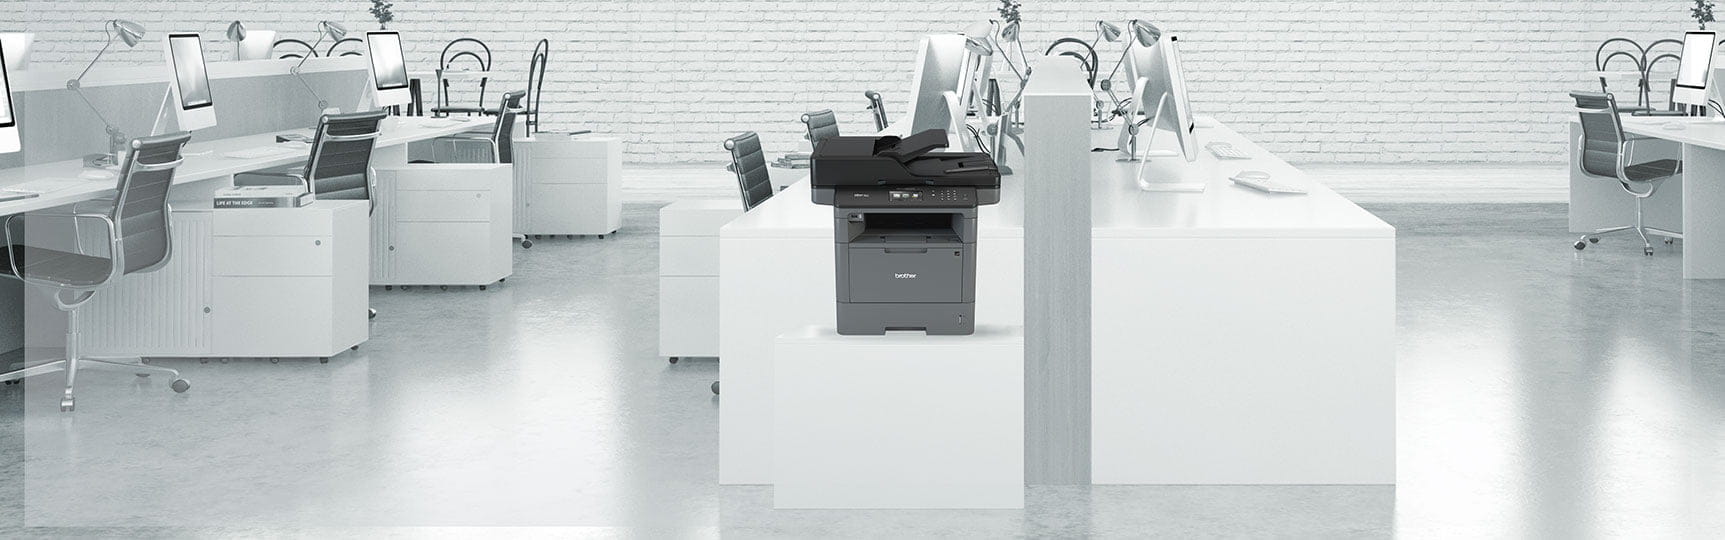 Office-layout-with-printer